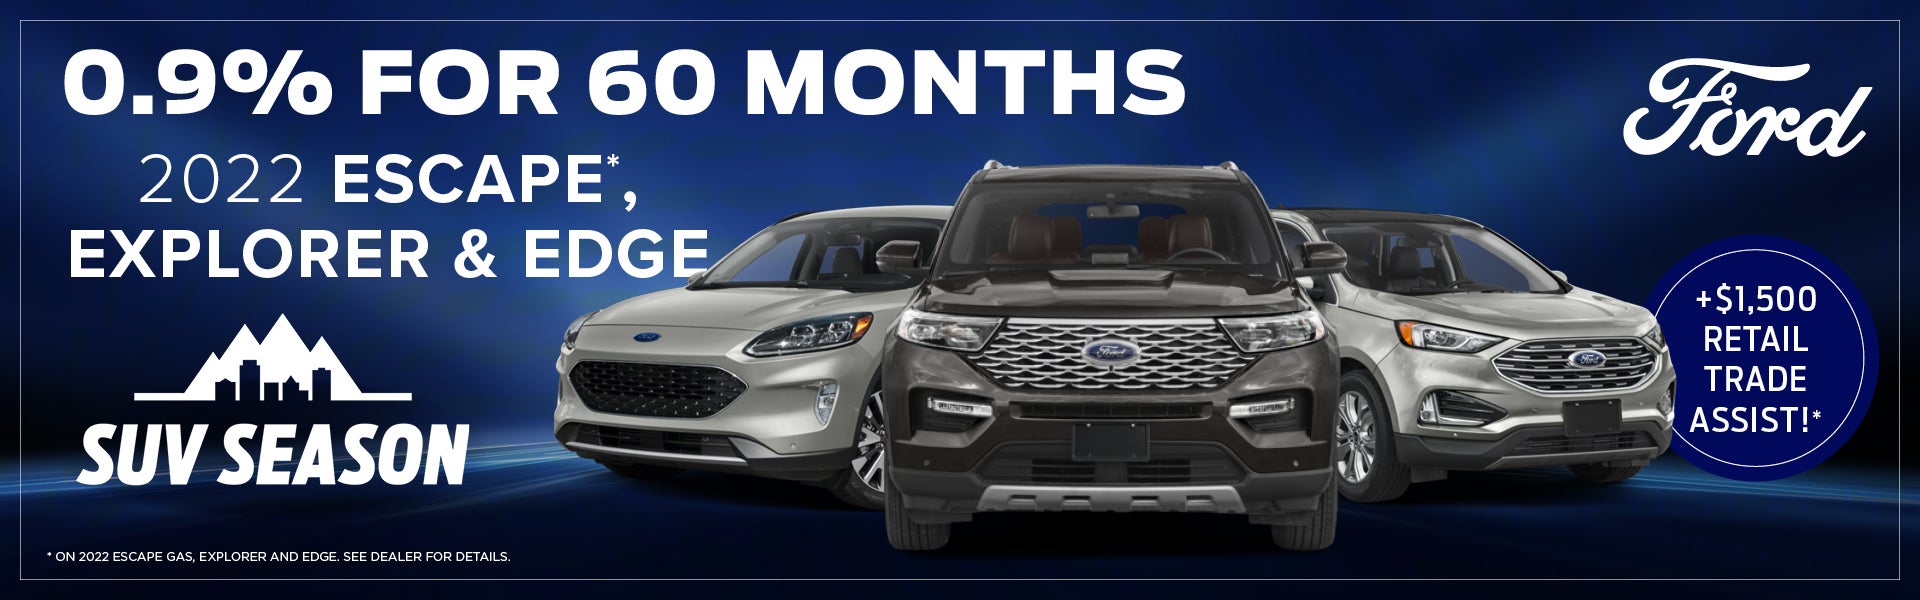 Check Out Friendship Ford's New SUV Inventory!